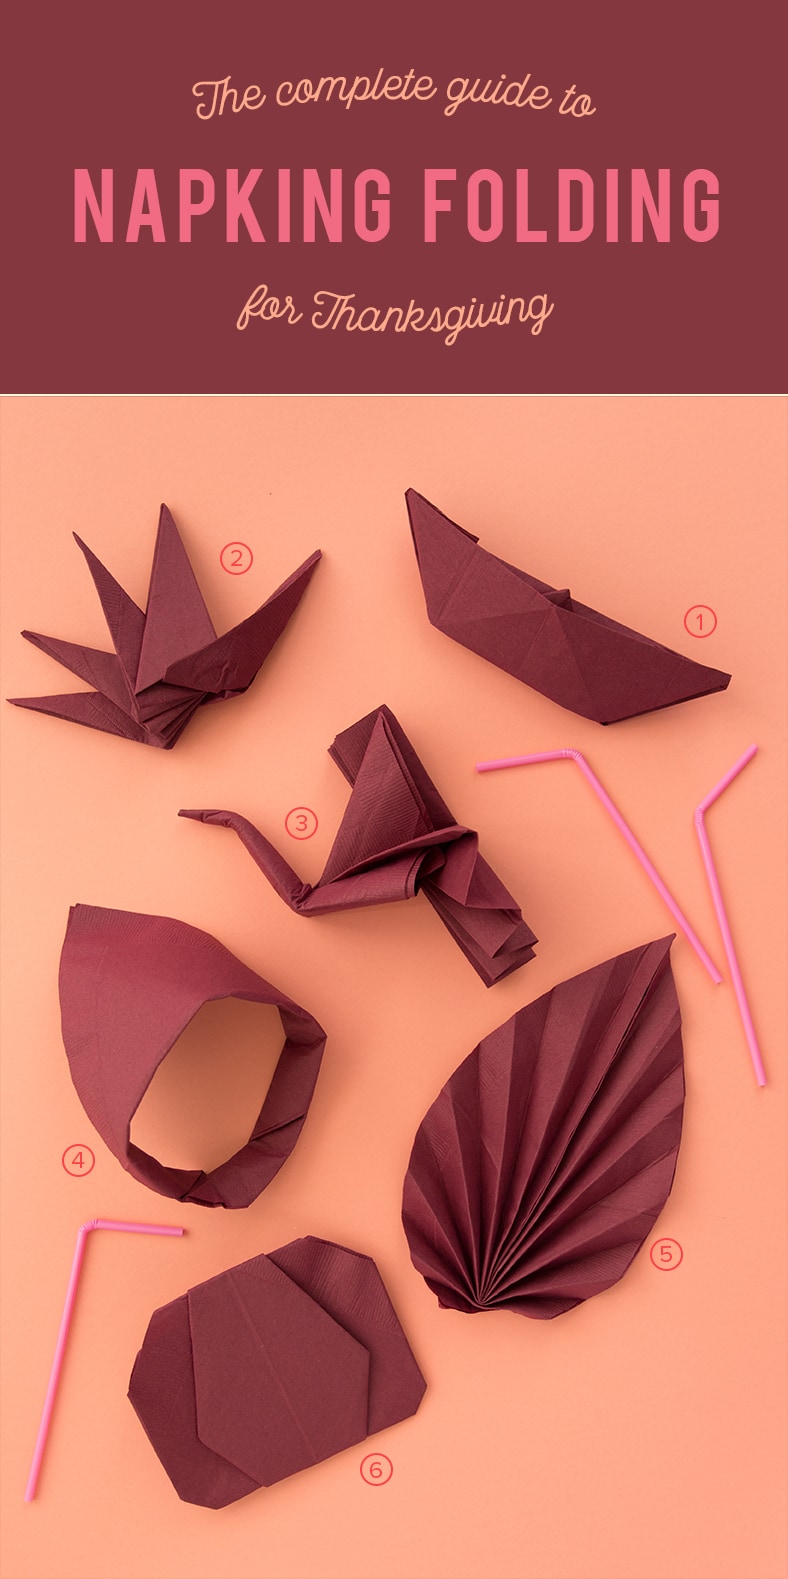 fun napkin folds for the holidays